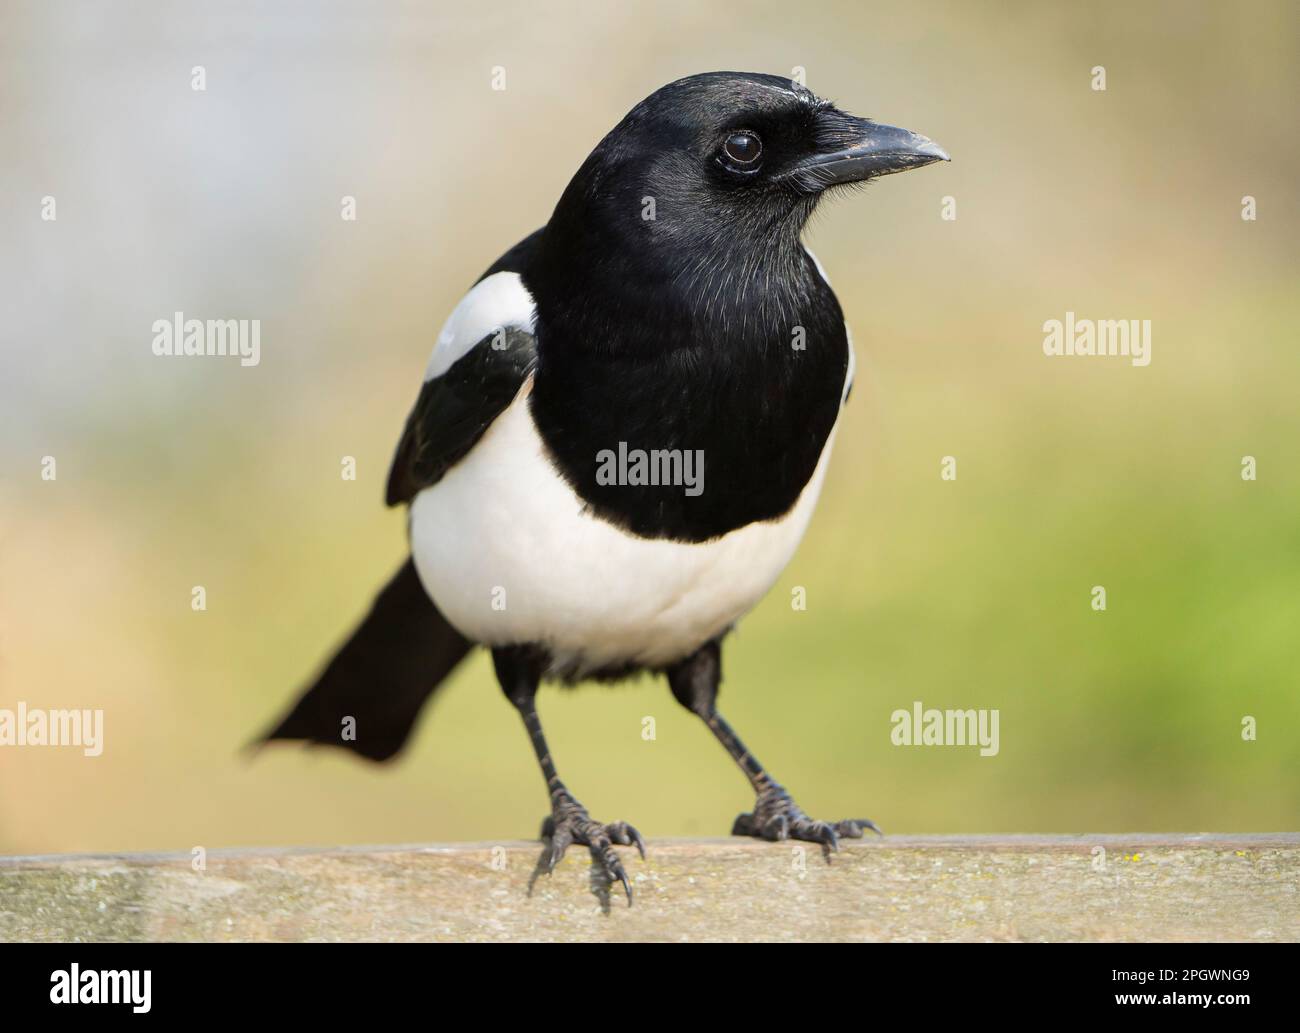 Detailed, front close up of a wild, UK magpie bird (Pica pica) standing isolated outdoors on a garden fence. British corvids in the wild. Stock Photo